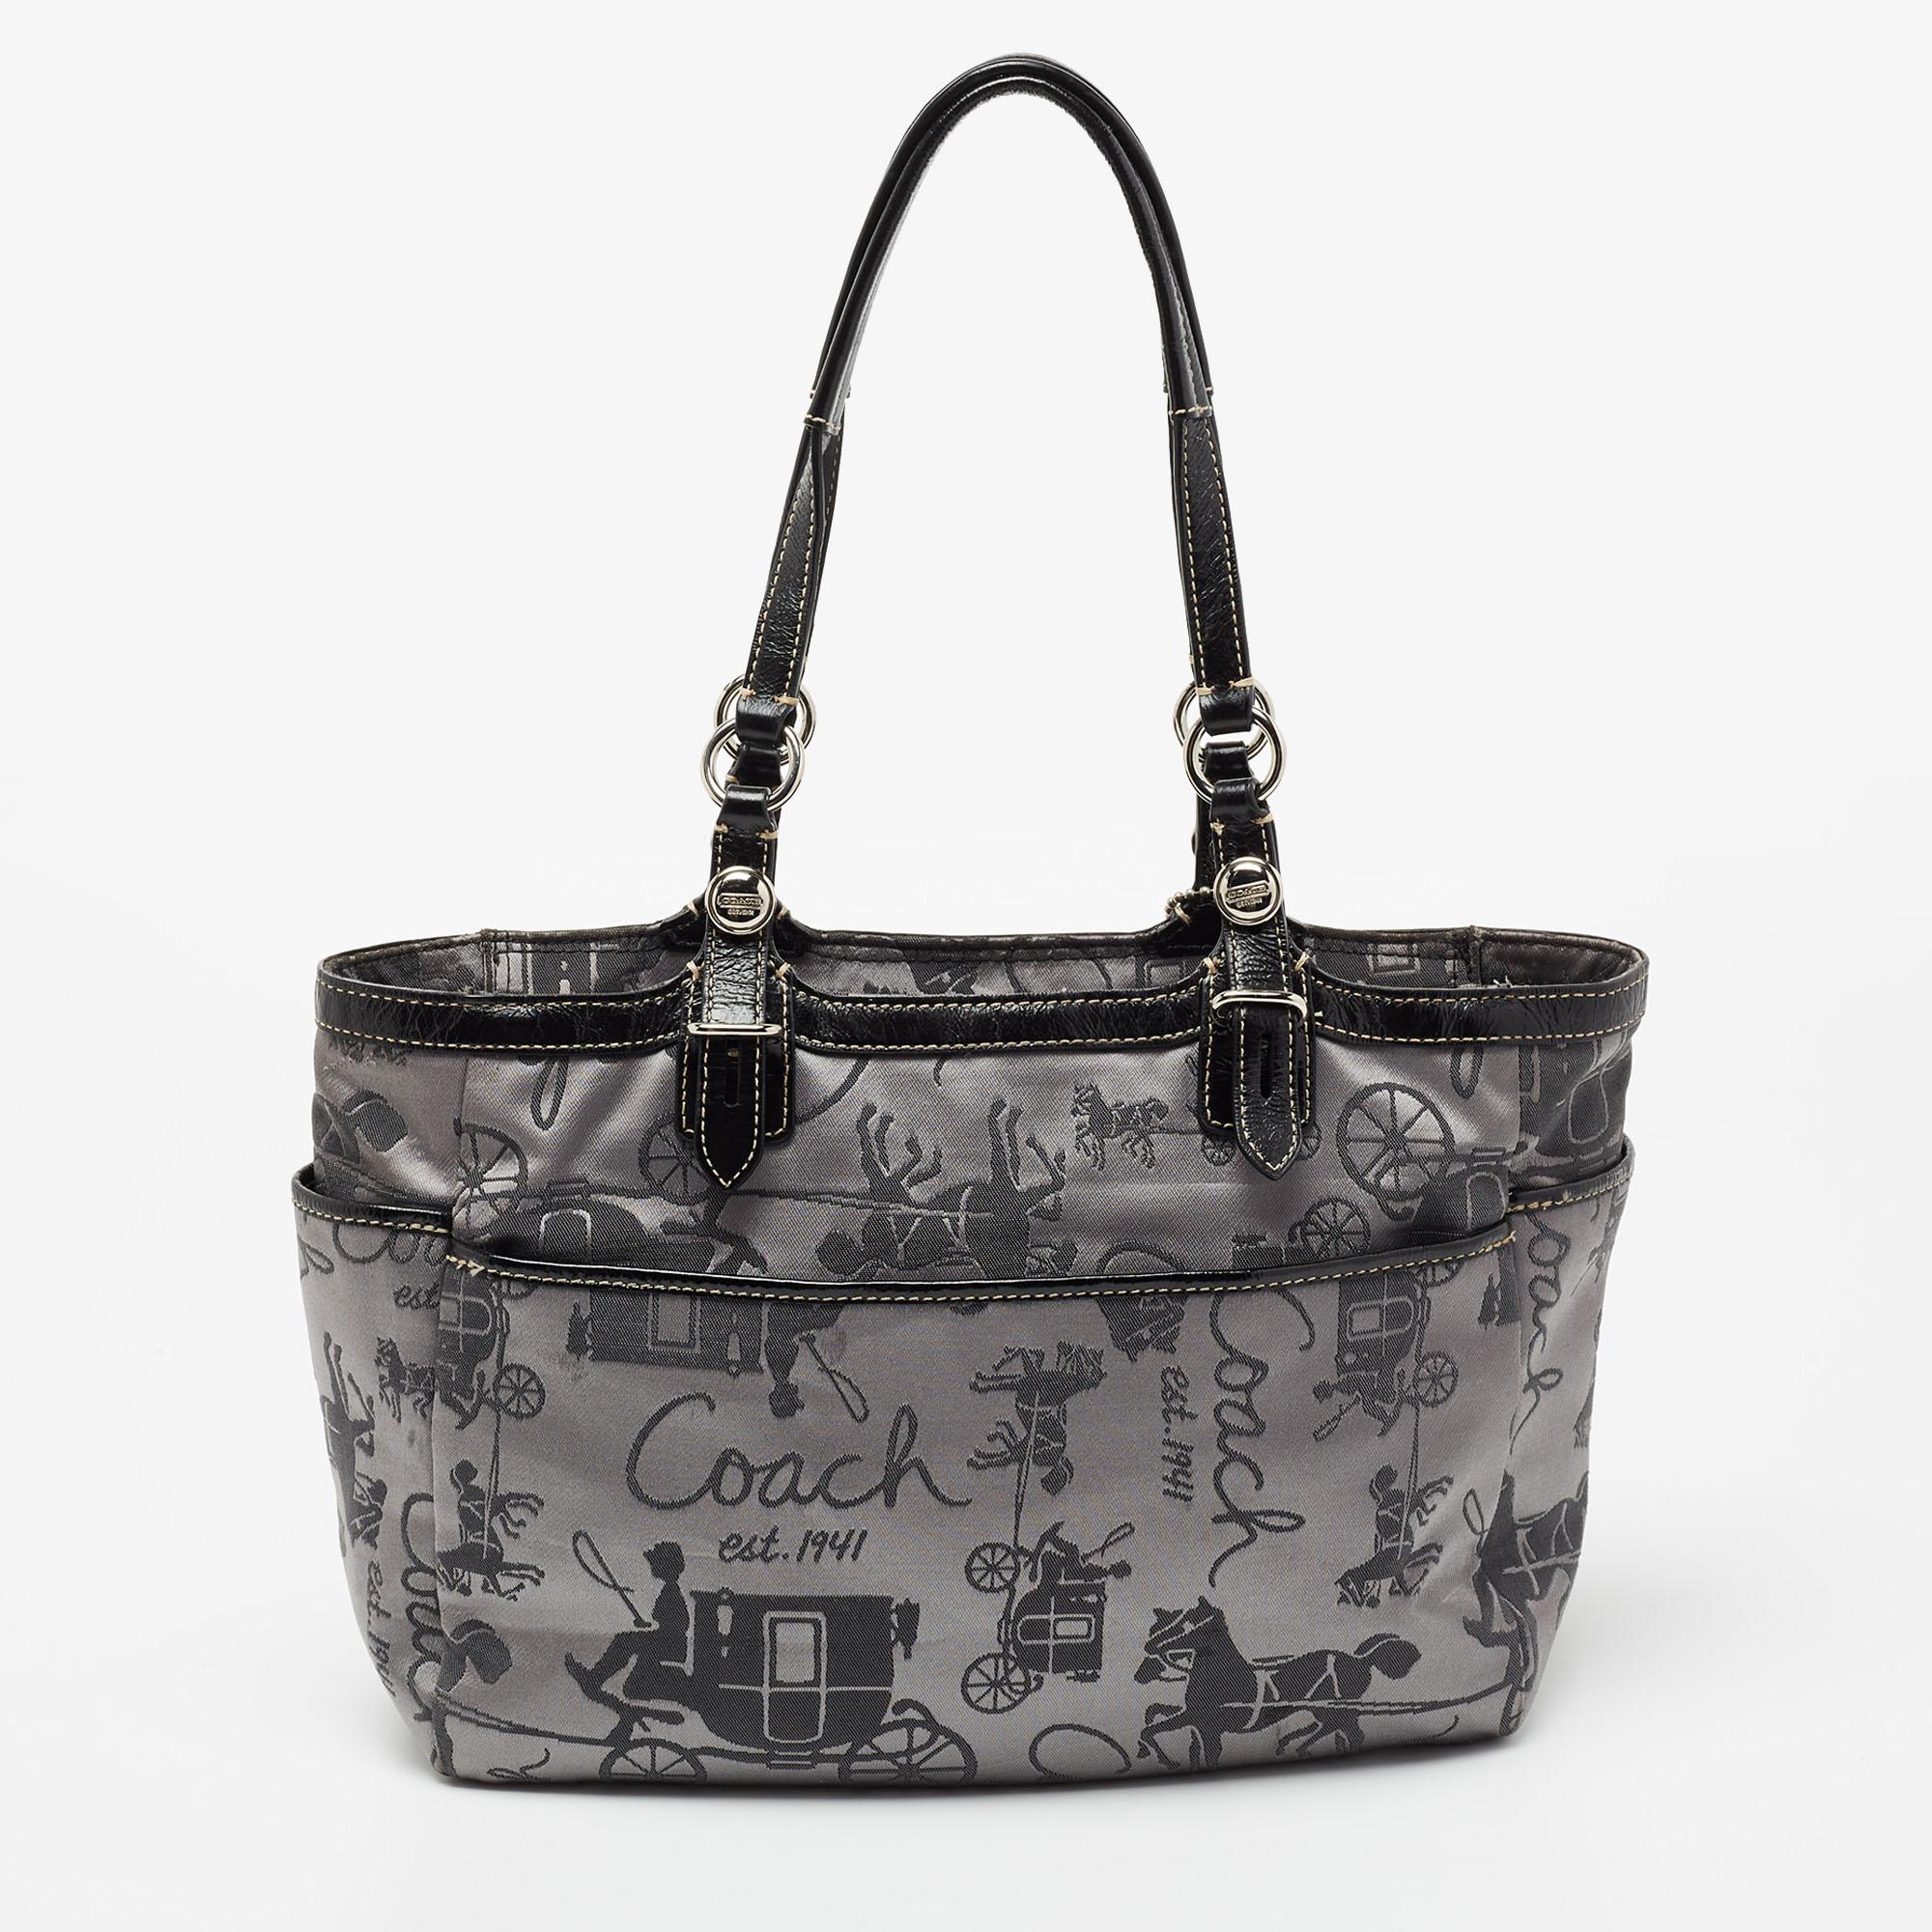 Crafted from printed fabric and leather, this Coach tote is stylish and functional. It carries a grey-black exterior and a top zipper that leads way to a satin interior well-sized to carry your essentials. The artistic bag is equipped with two